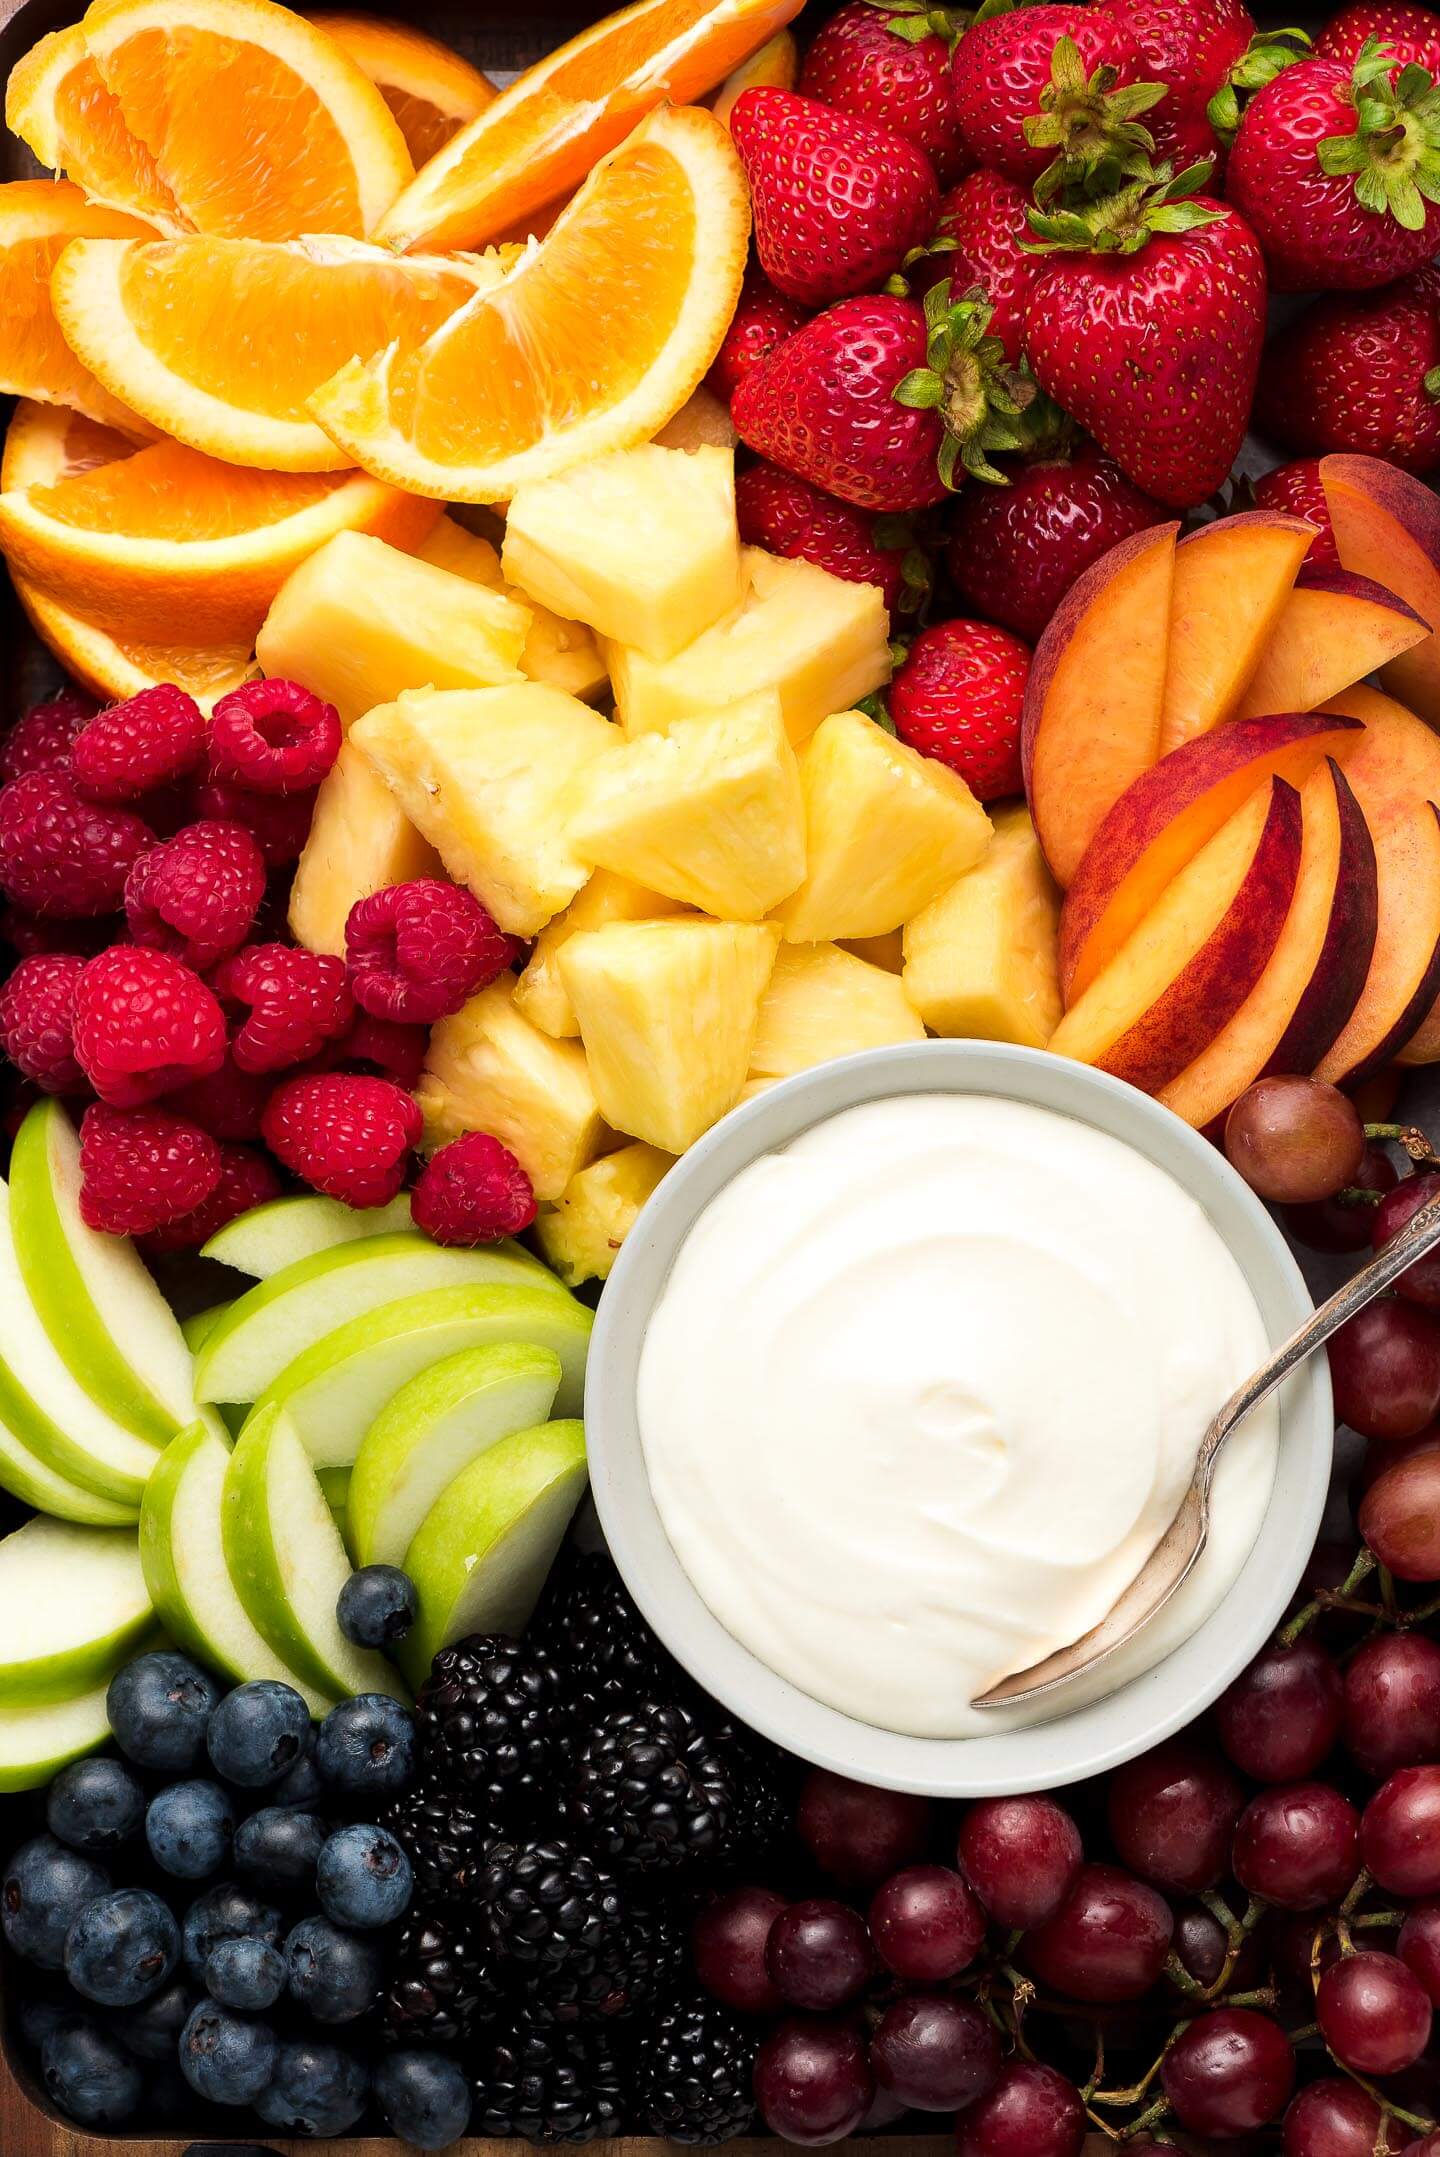 A close up of strawberries, oranges, raspberries, pineapple chunks, peaches slices, apple slices, blueberries, blackberries, red grapes, and fruit dip.